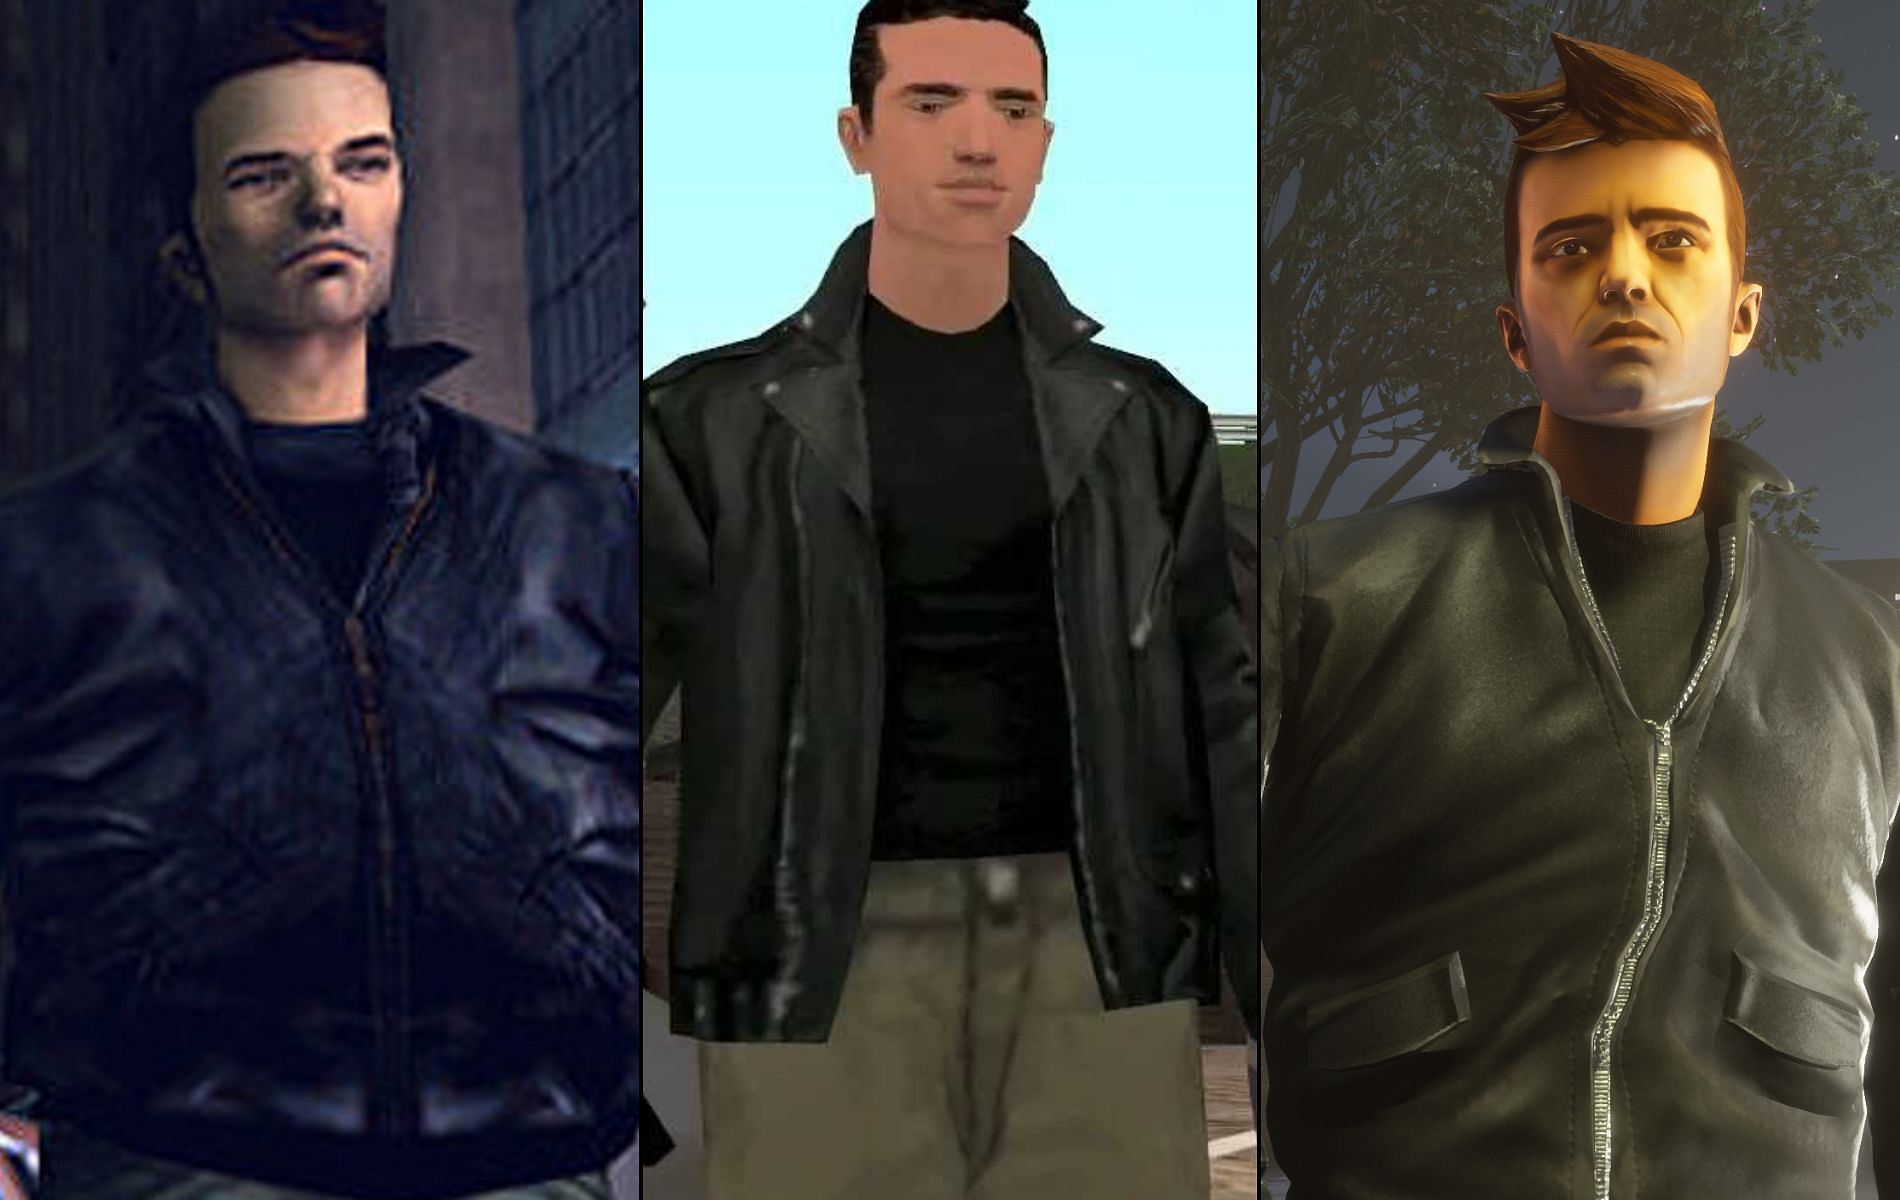 GTA Protagonists in REAL LIFE & What They Really Sound Like (GTA3 - GTA 5)  